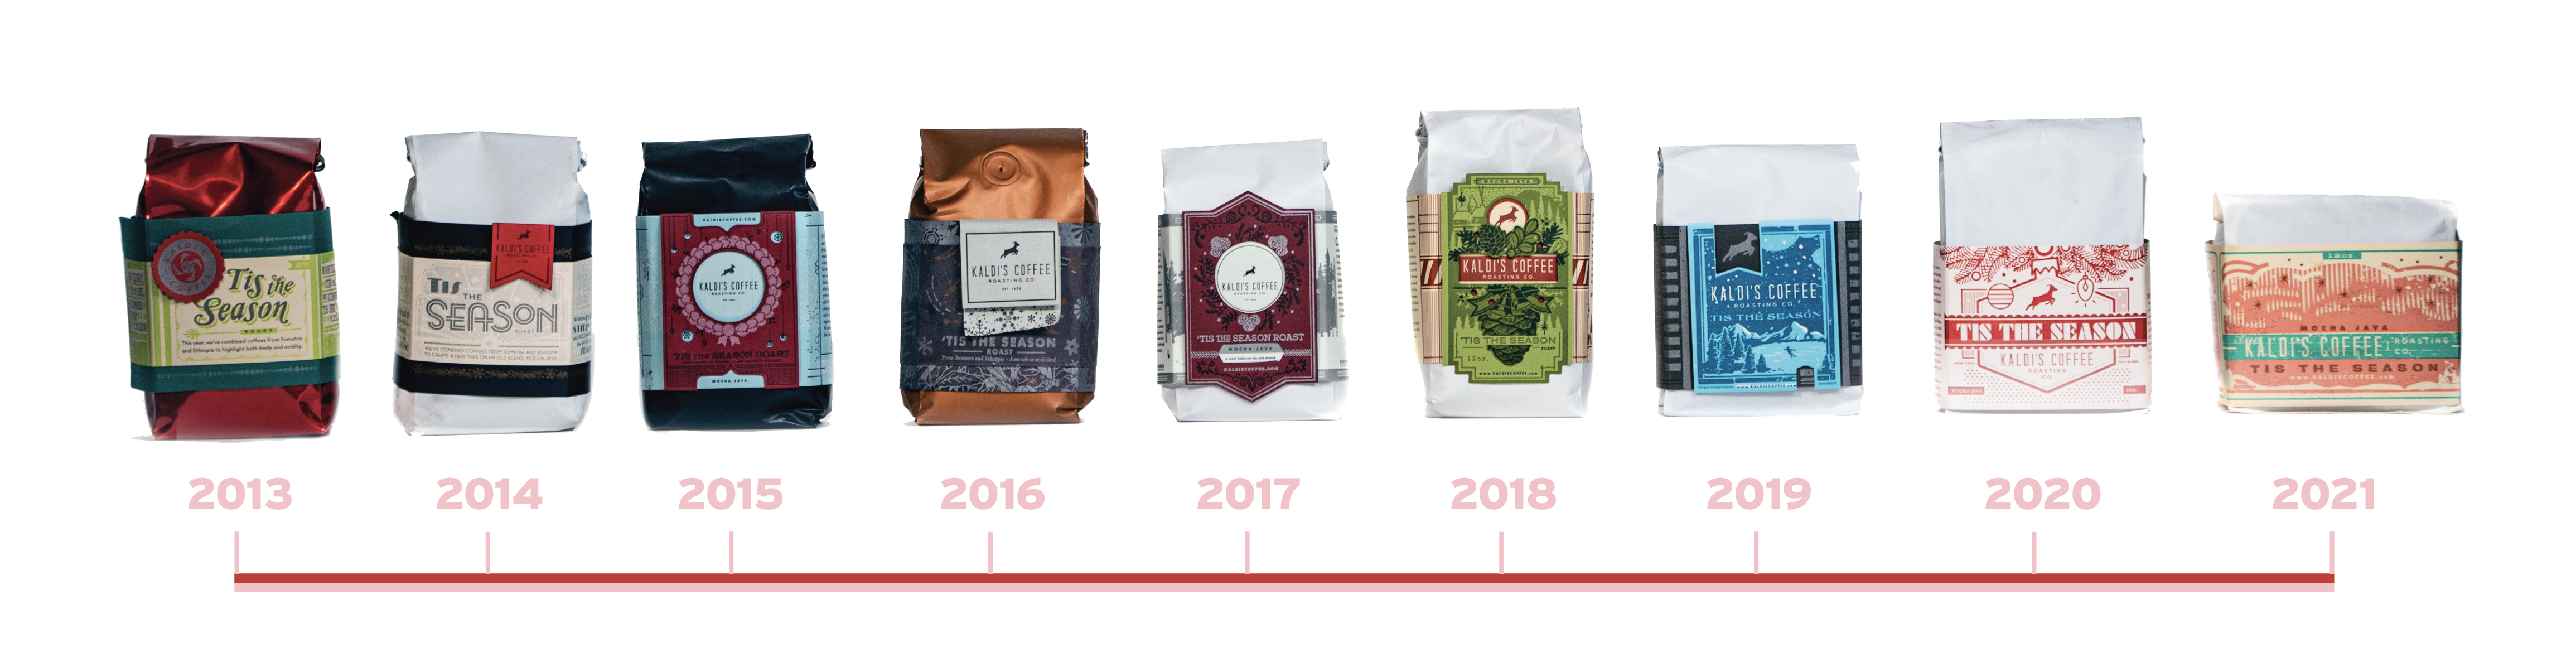 Timeline of 'Tis the Season bags from 2012 to 2021